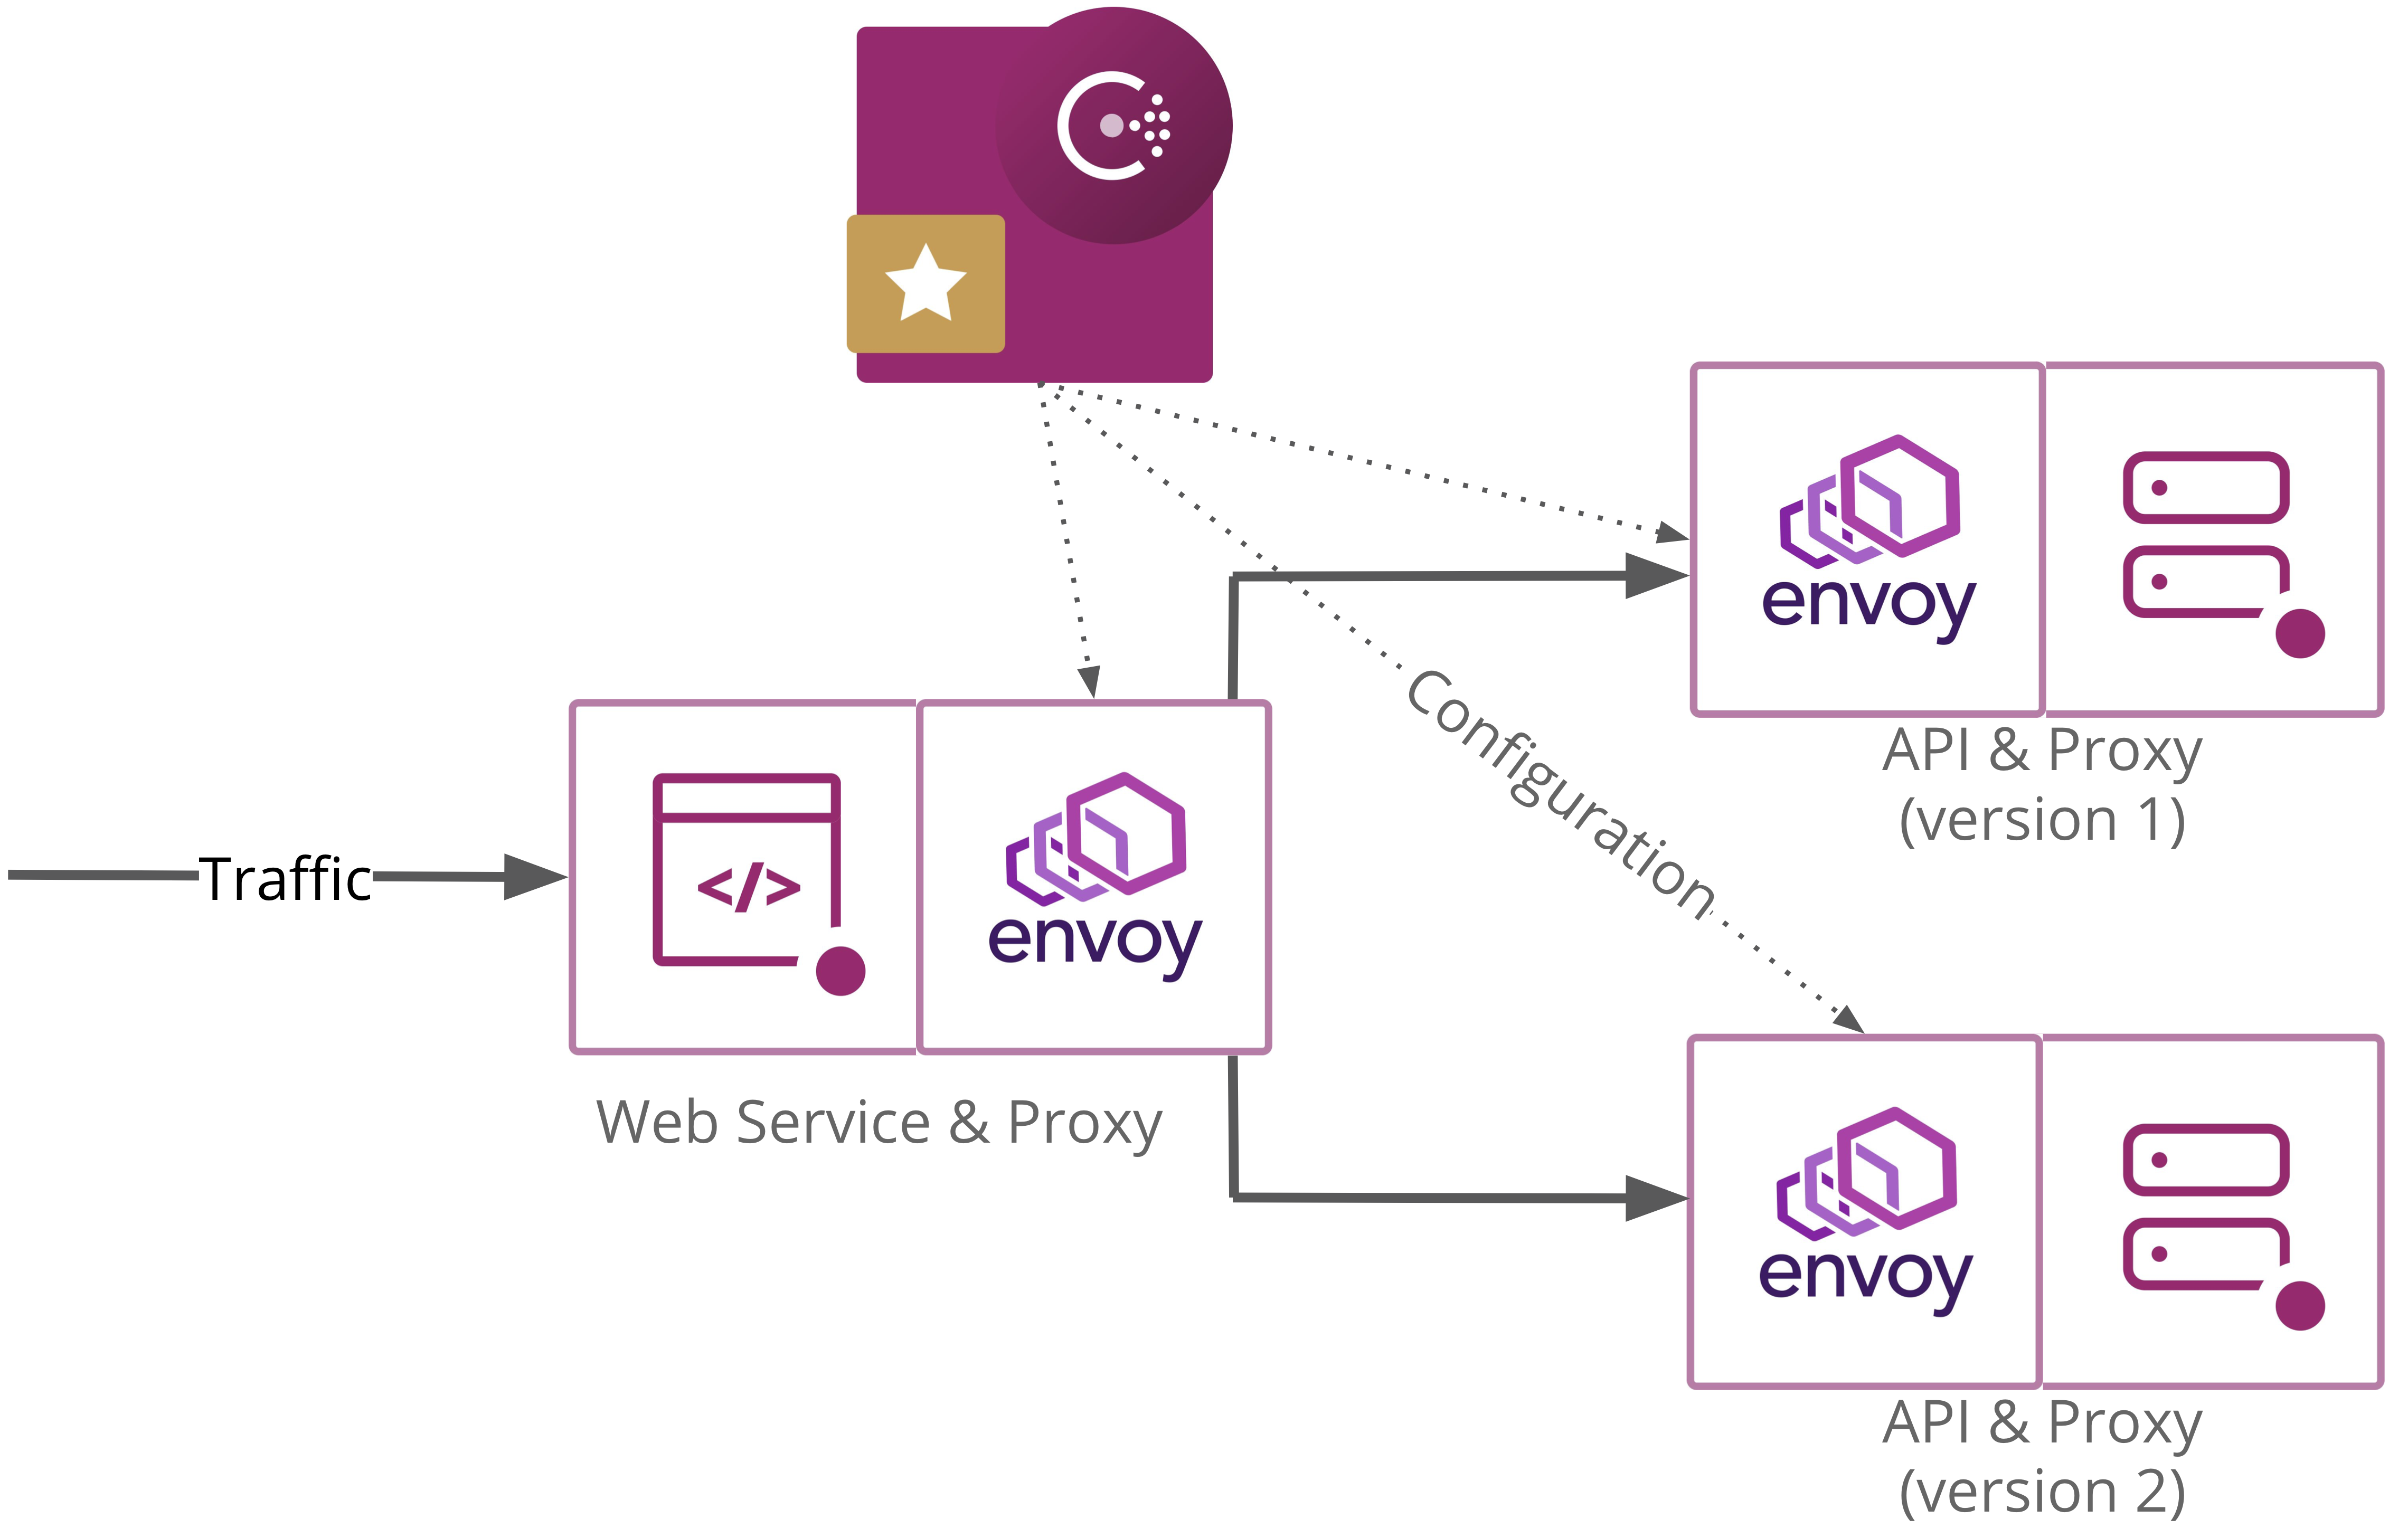 Architecture diagram of the splitting demo. A web service directly connects to two different versions of the API service through proxies. Consul configures those proxies.